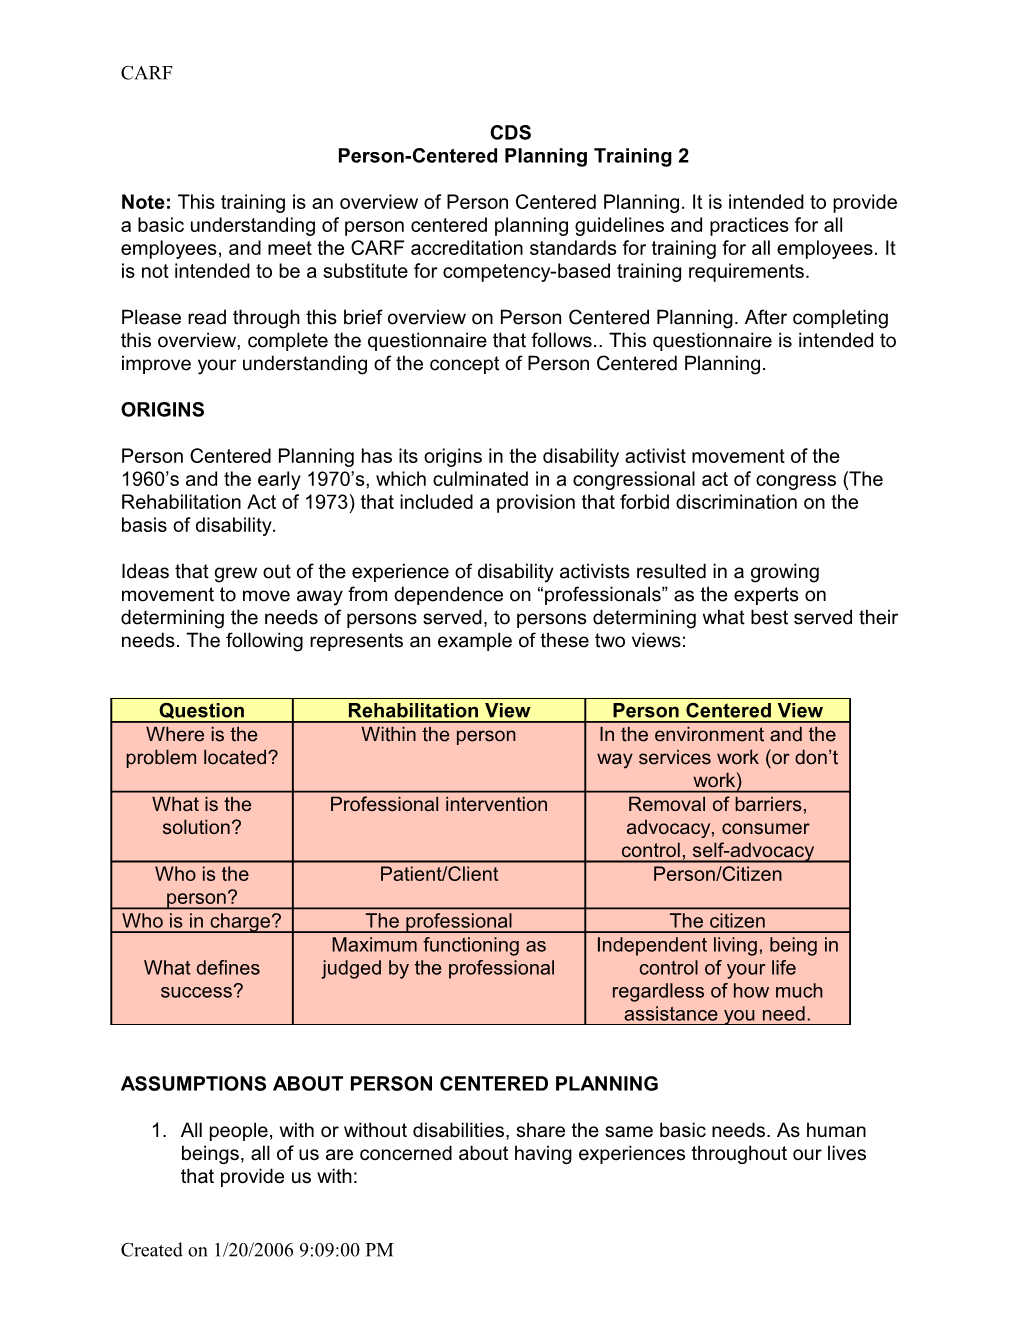 CDS Person-Centered Planning Training 2